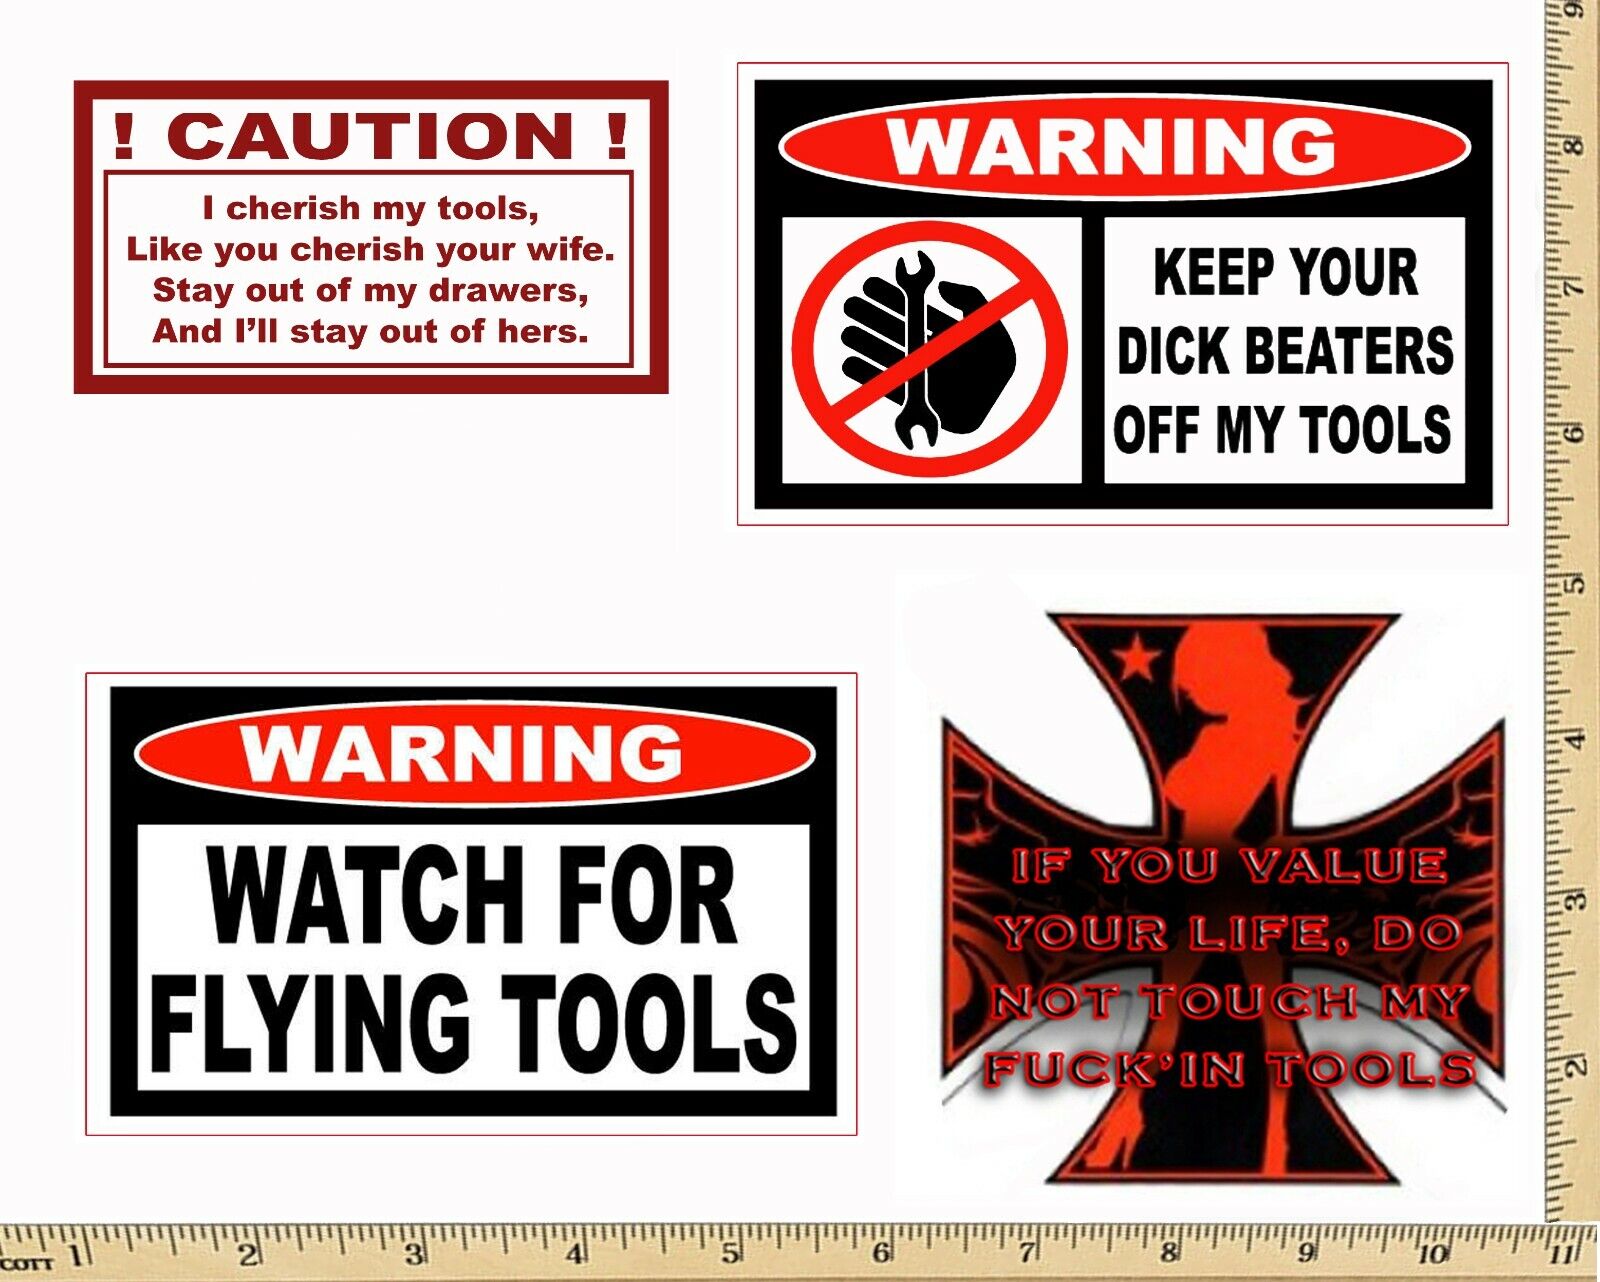 Funny Warning Stickers - Complete set of 4 Decals - Sexy Girl Tool Box MADE USA